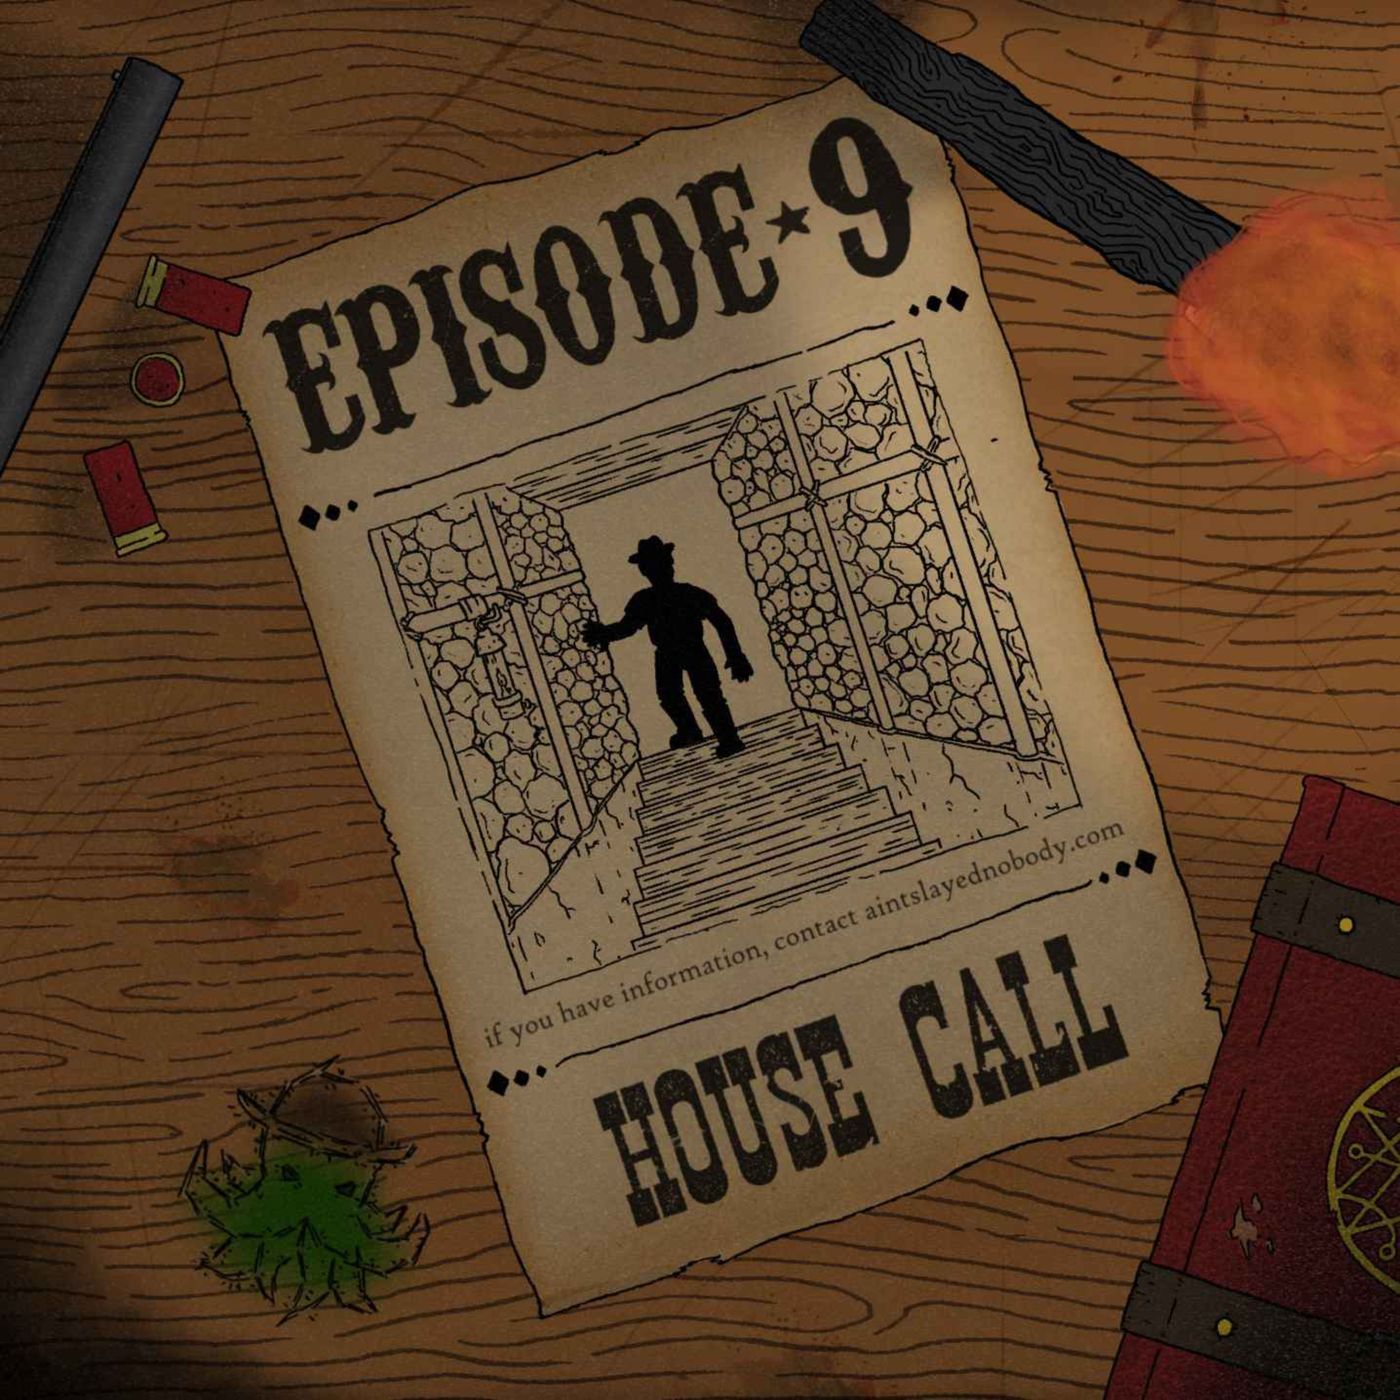 Y'all of Cthulhu (NP) 9/21 - House Call